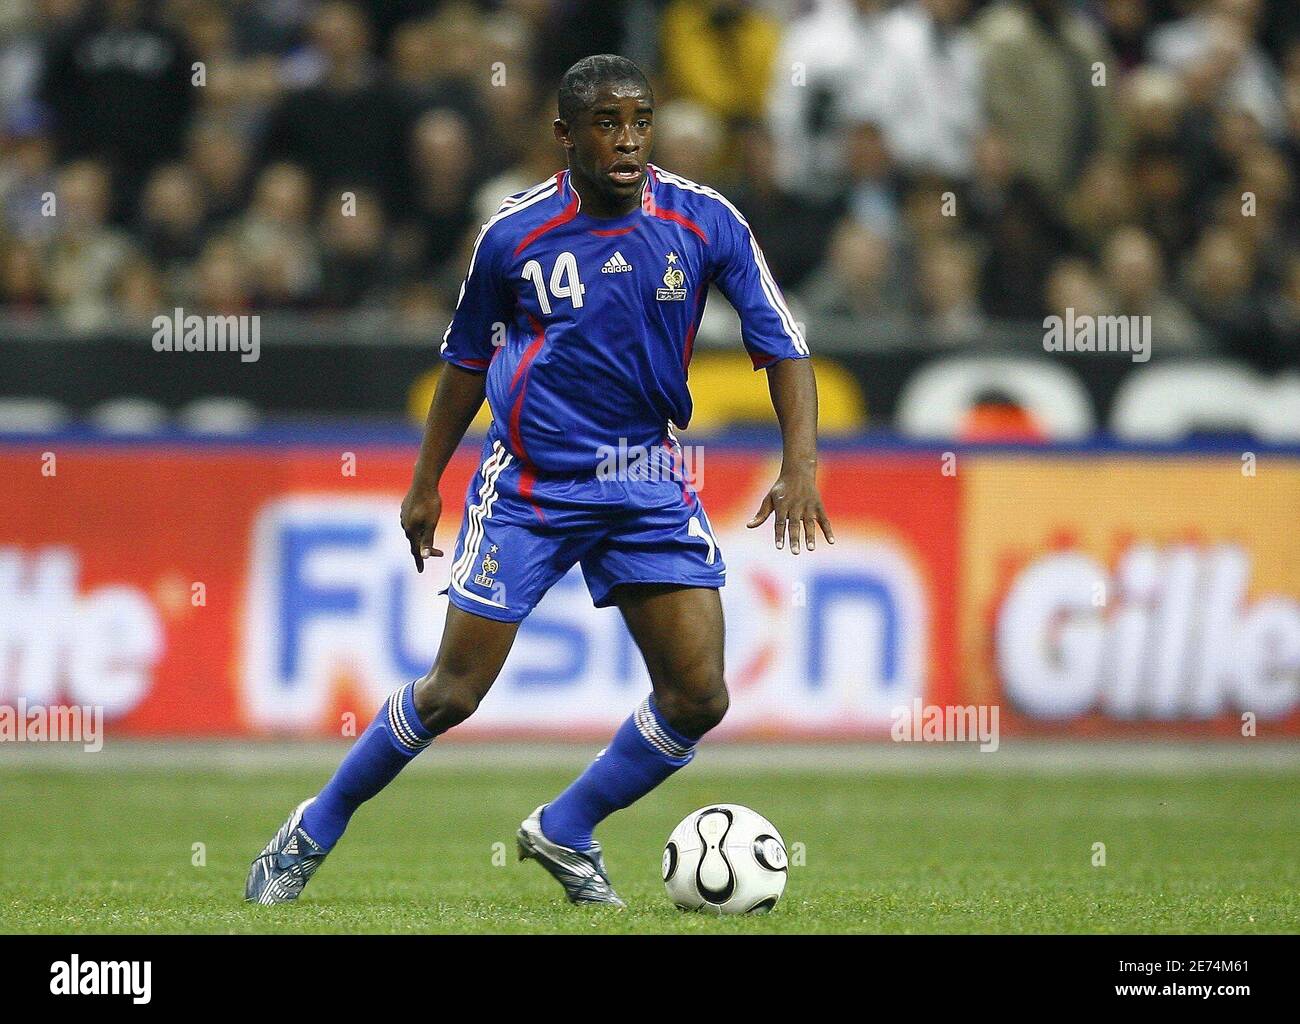 France's Rio Antonio Mavuba in action during the international friendly match, France vs Austria at the Stade de France, in Saint-Denis, near Paris, France on March 28, 2007. France won 1-0. Photo by Christian Liewig/ABACAPRESS.COM Stock Photo